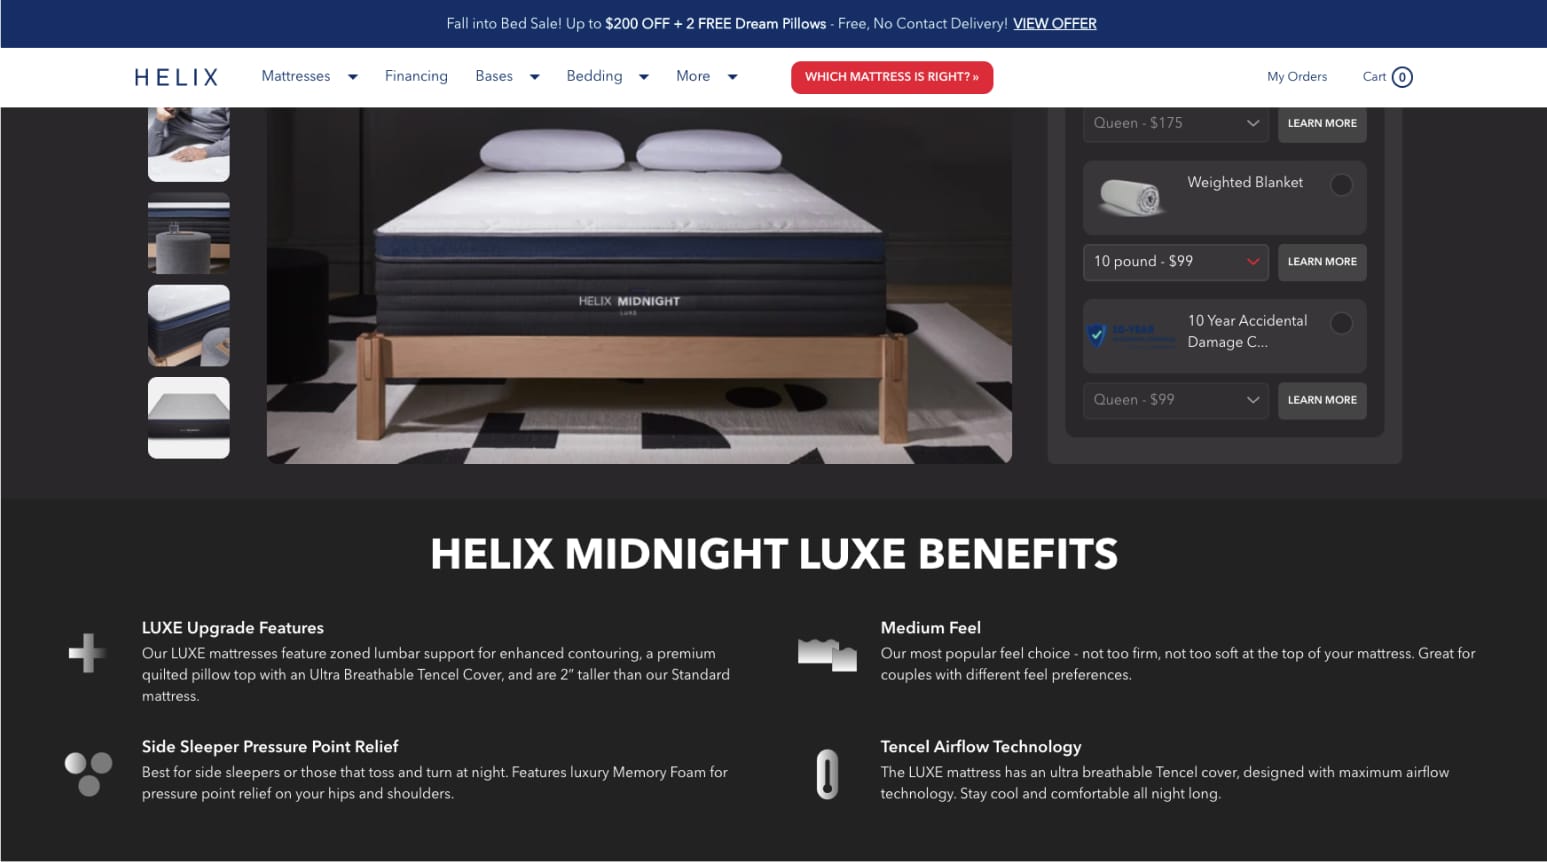 helix midnight luxe benefits product page product description